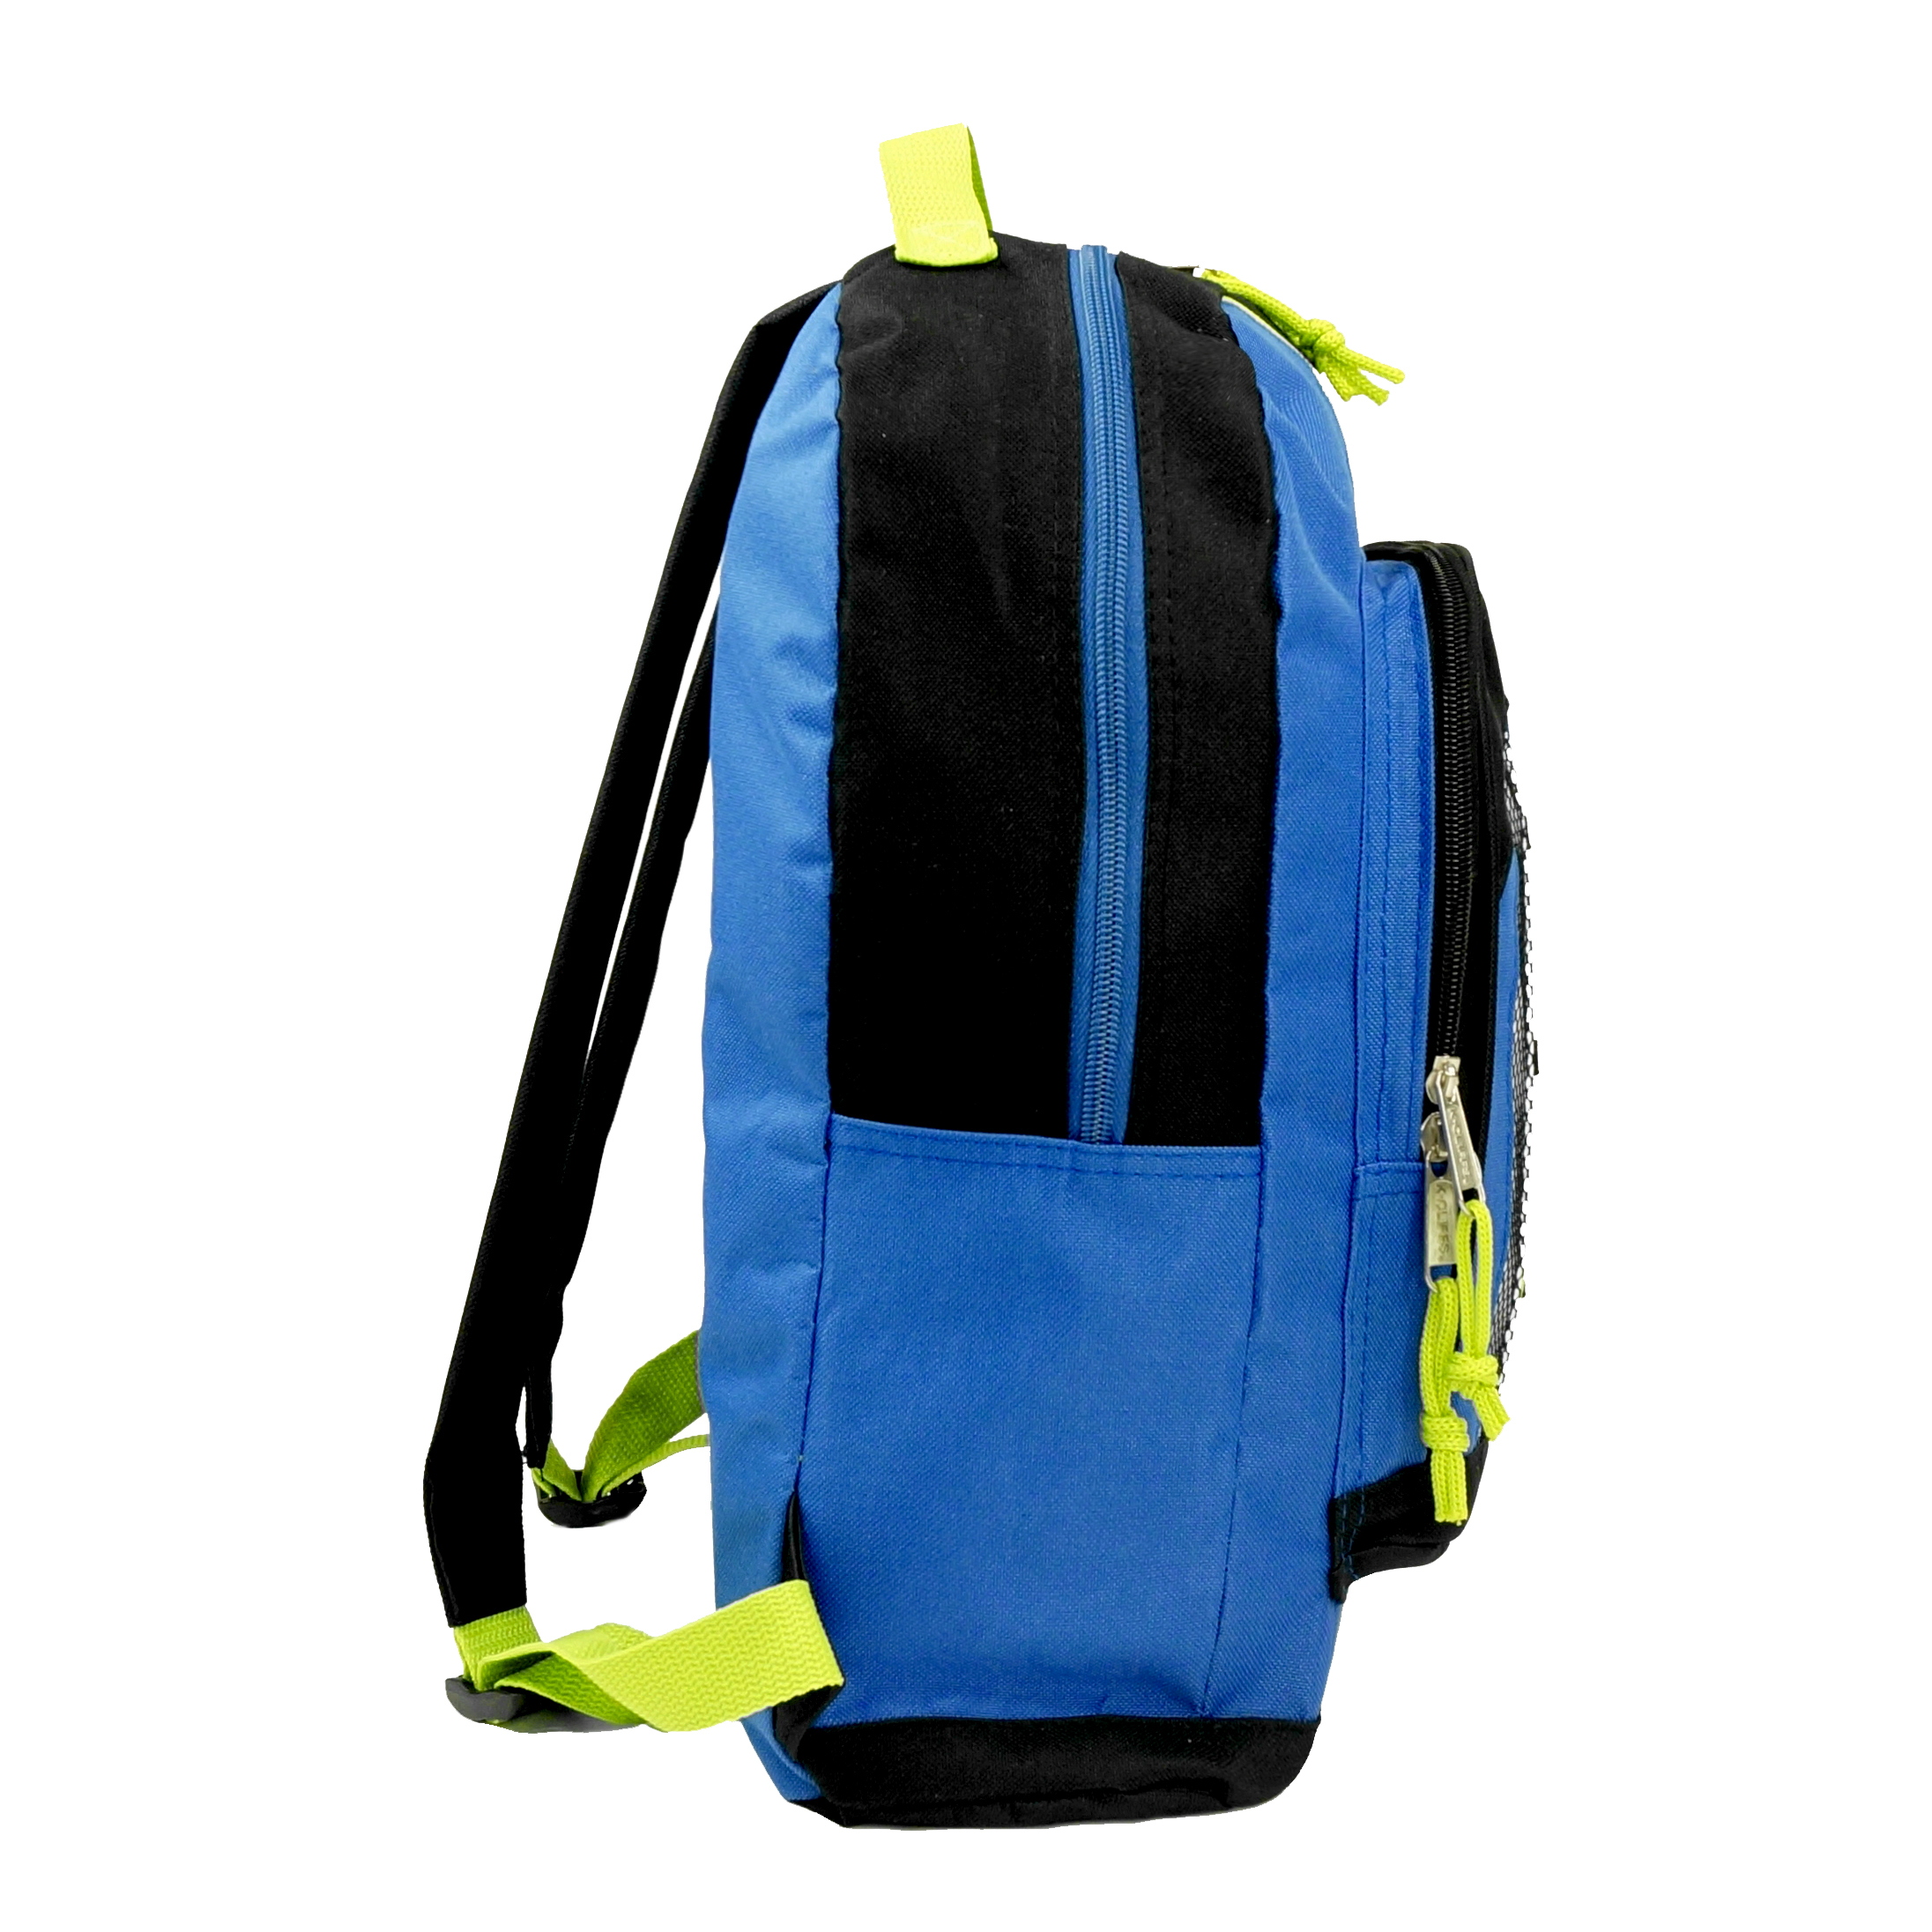 K-Cliffs 15" Lightweight Backpack, Daypack Bungee Water Resistant for Travel School and College, Unisex Color for Casual Everyday Kids & Teens (Blue) - image 4 of 6